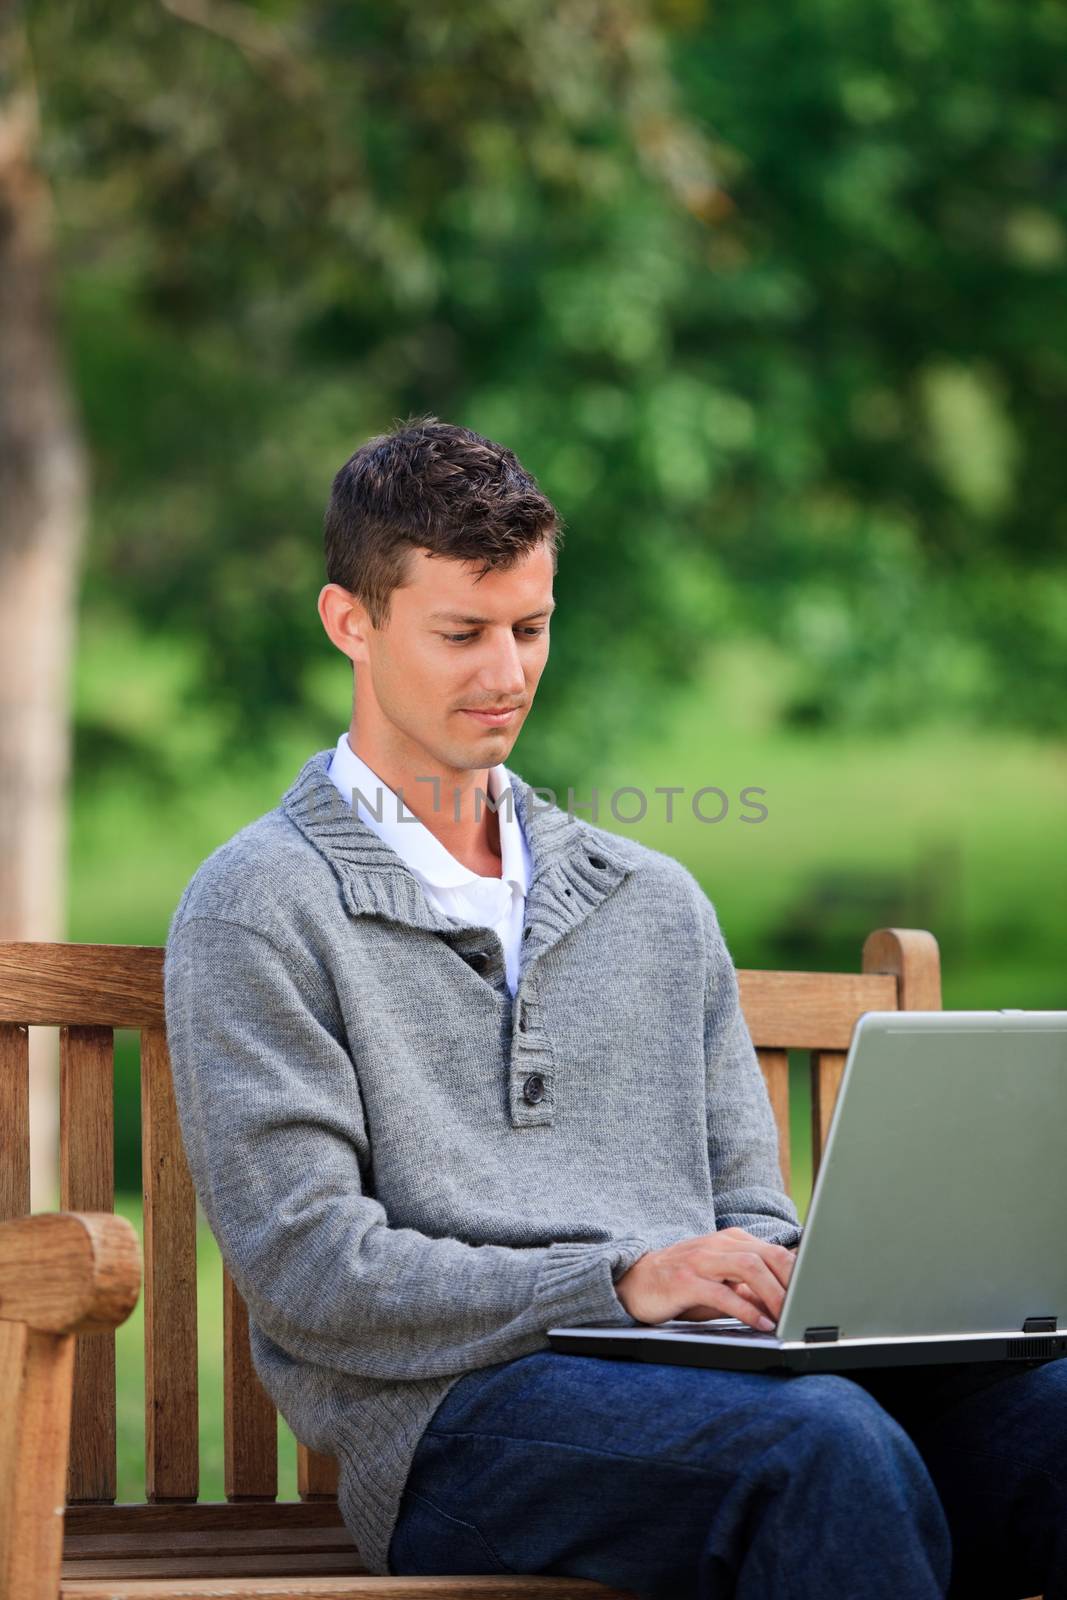 Concentrated man working on his laptop by Wavebreakmedia